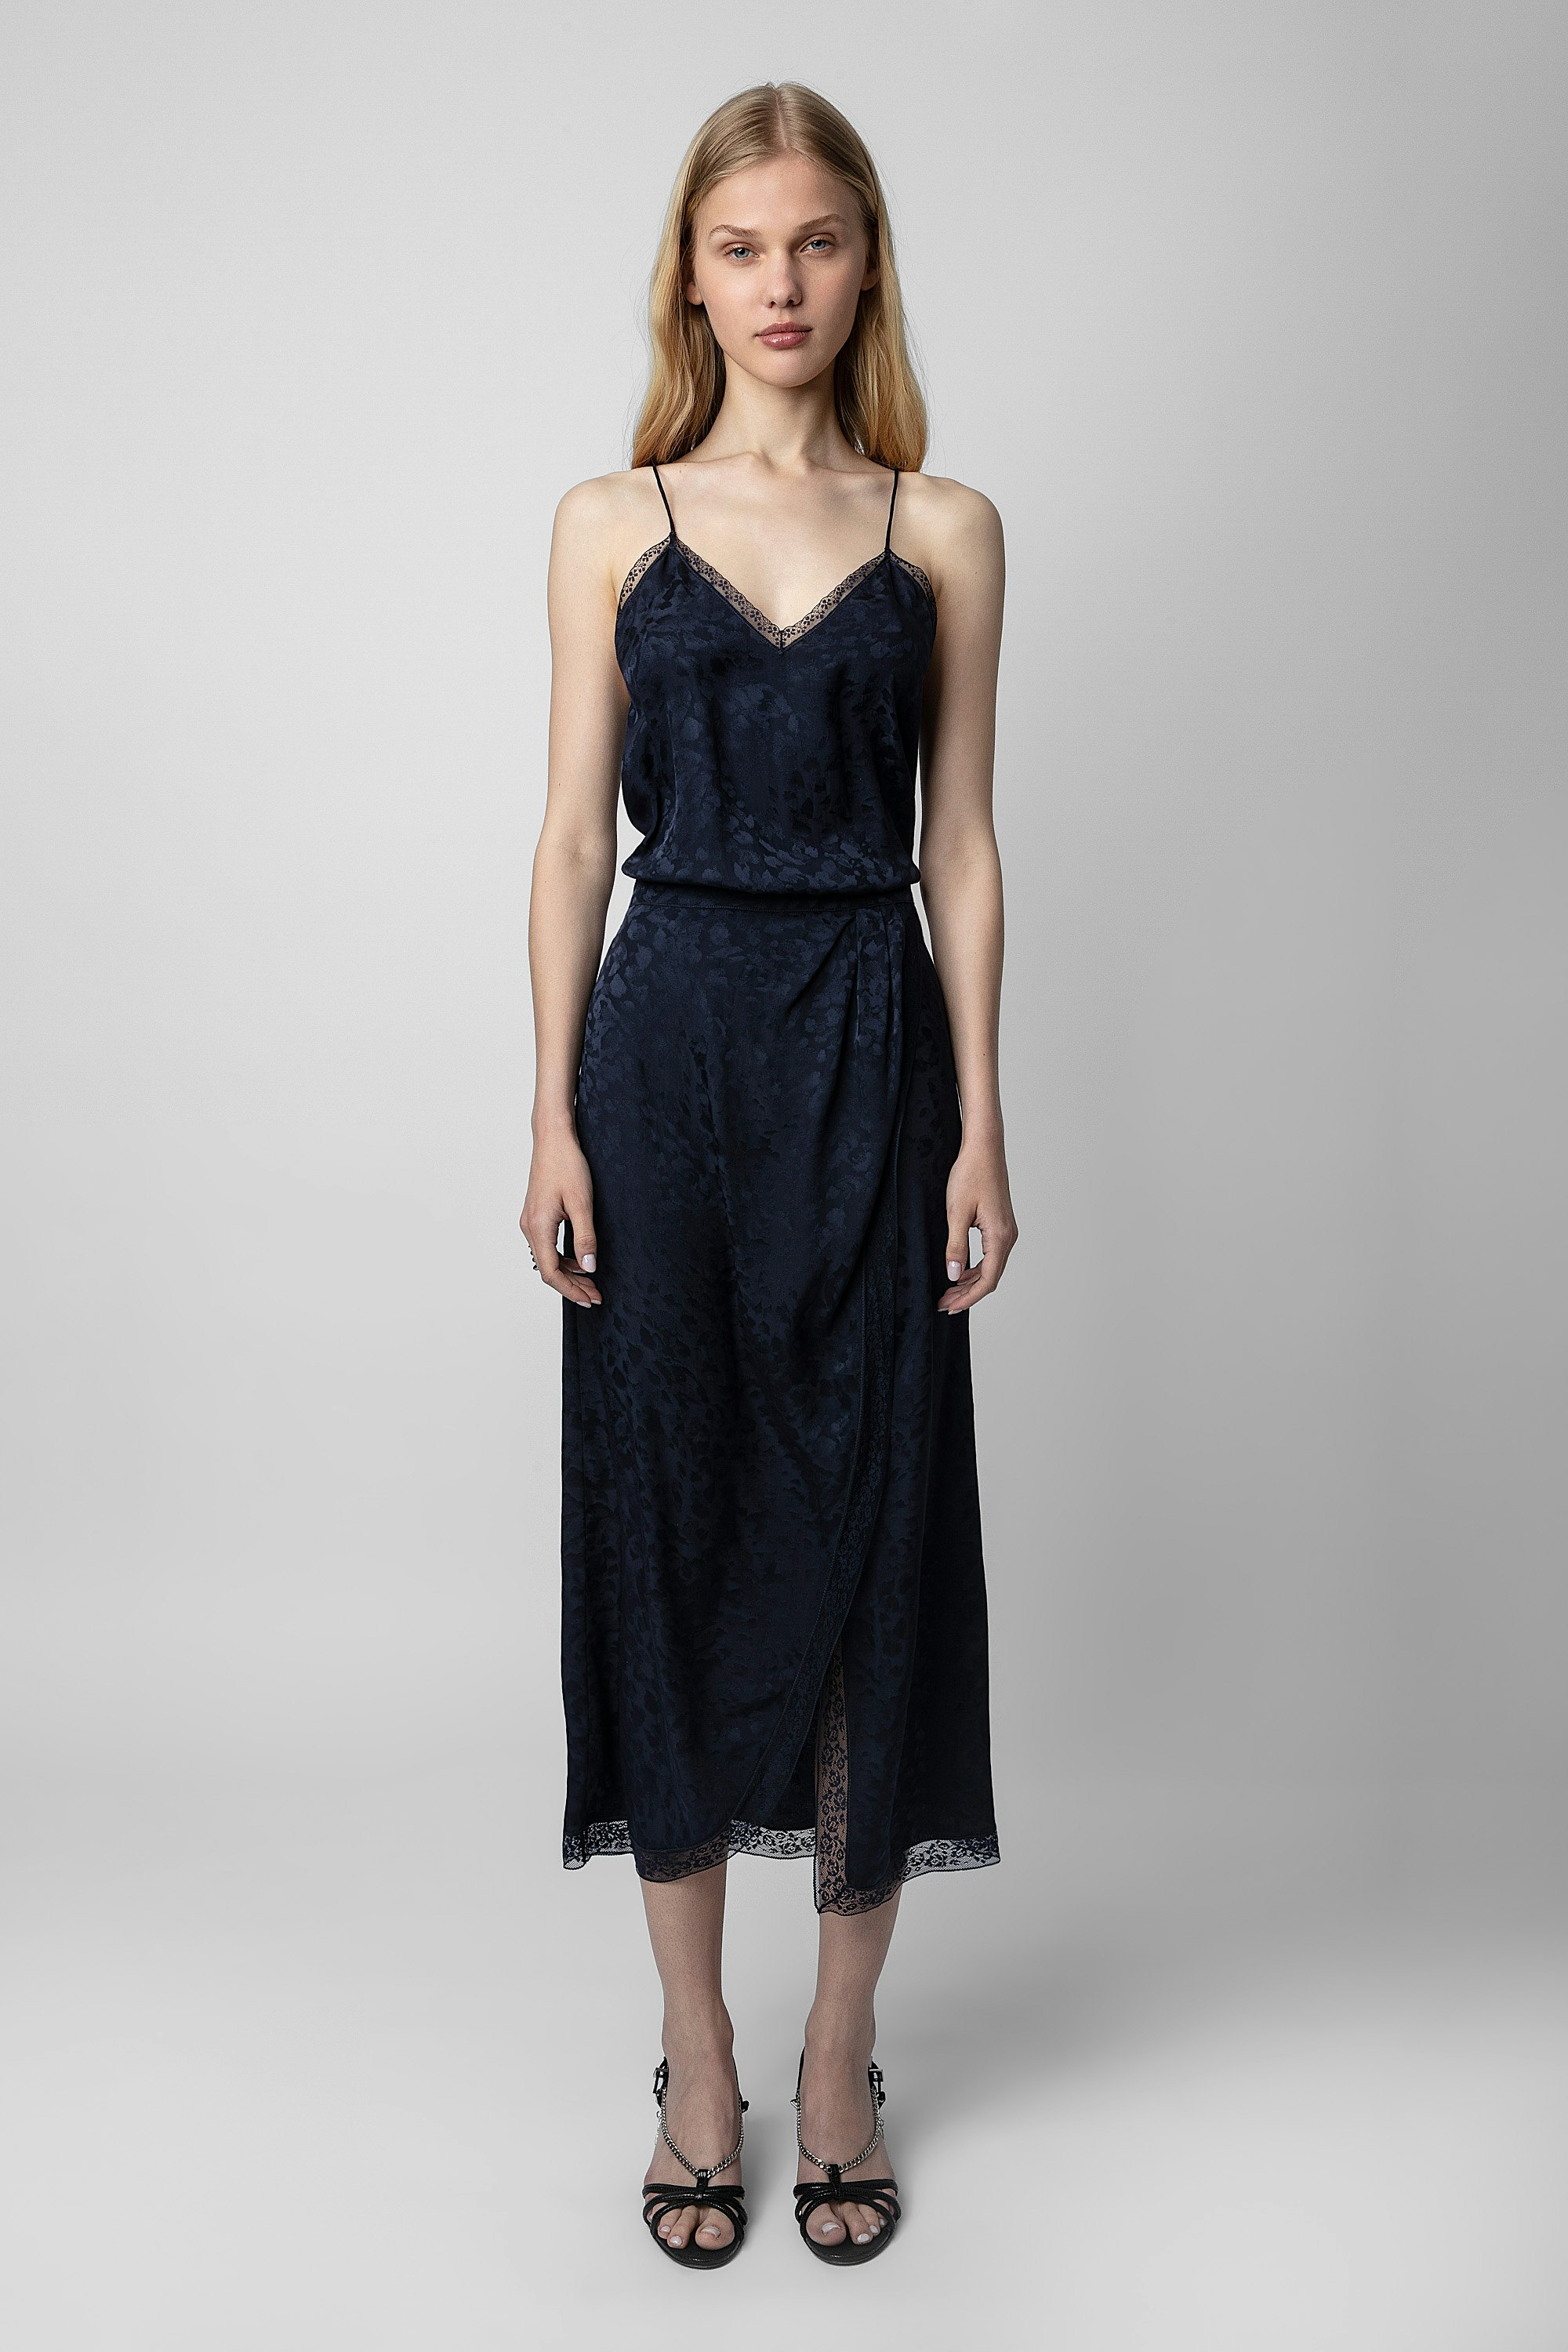 Rixi Silk Dress - Women's long dress in navy blue leopard jacquard with asymmetric skirt adorned with lace strips